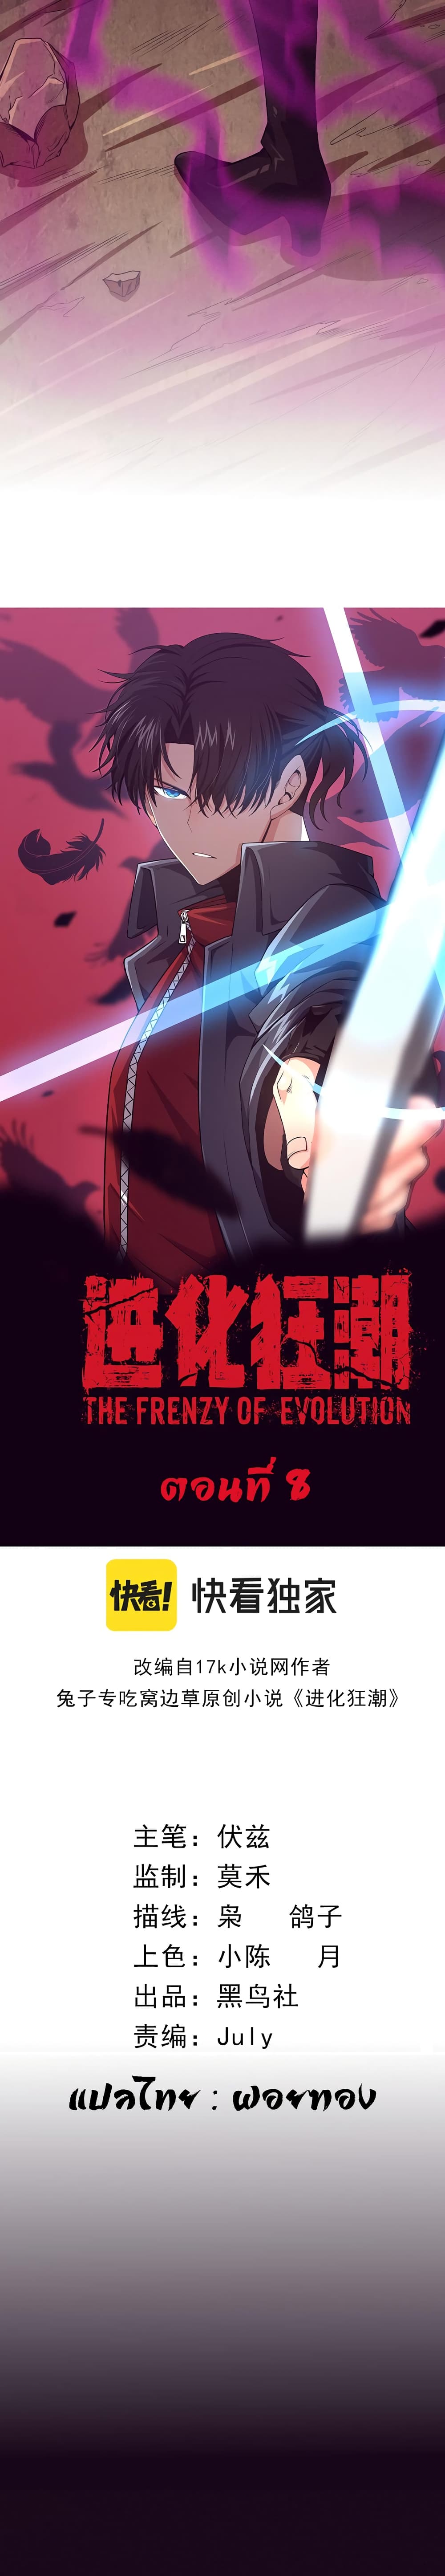 The Frenzy of Evolution8 02